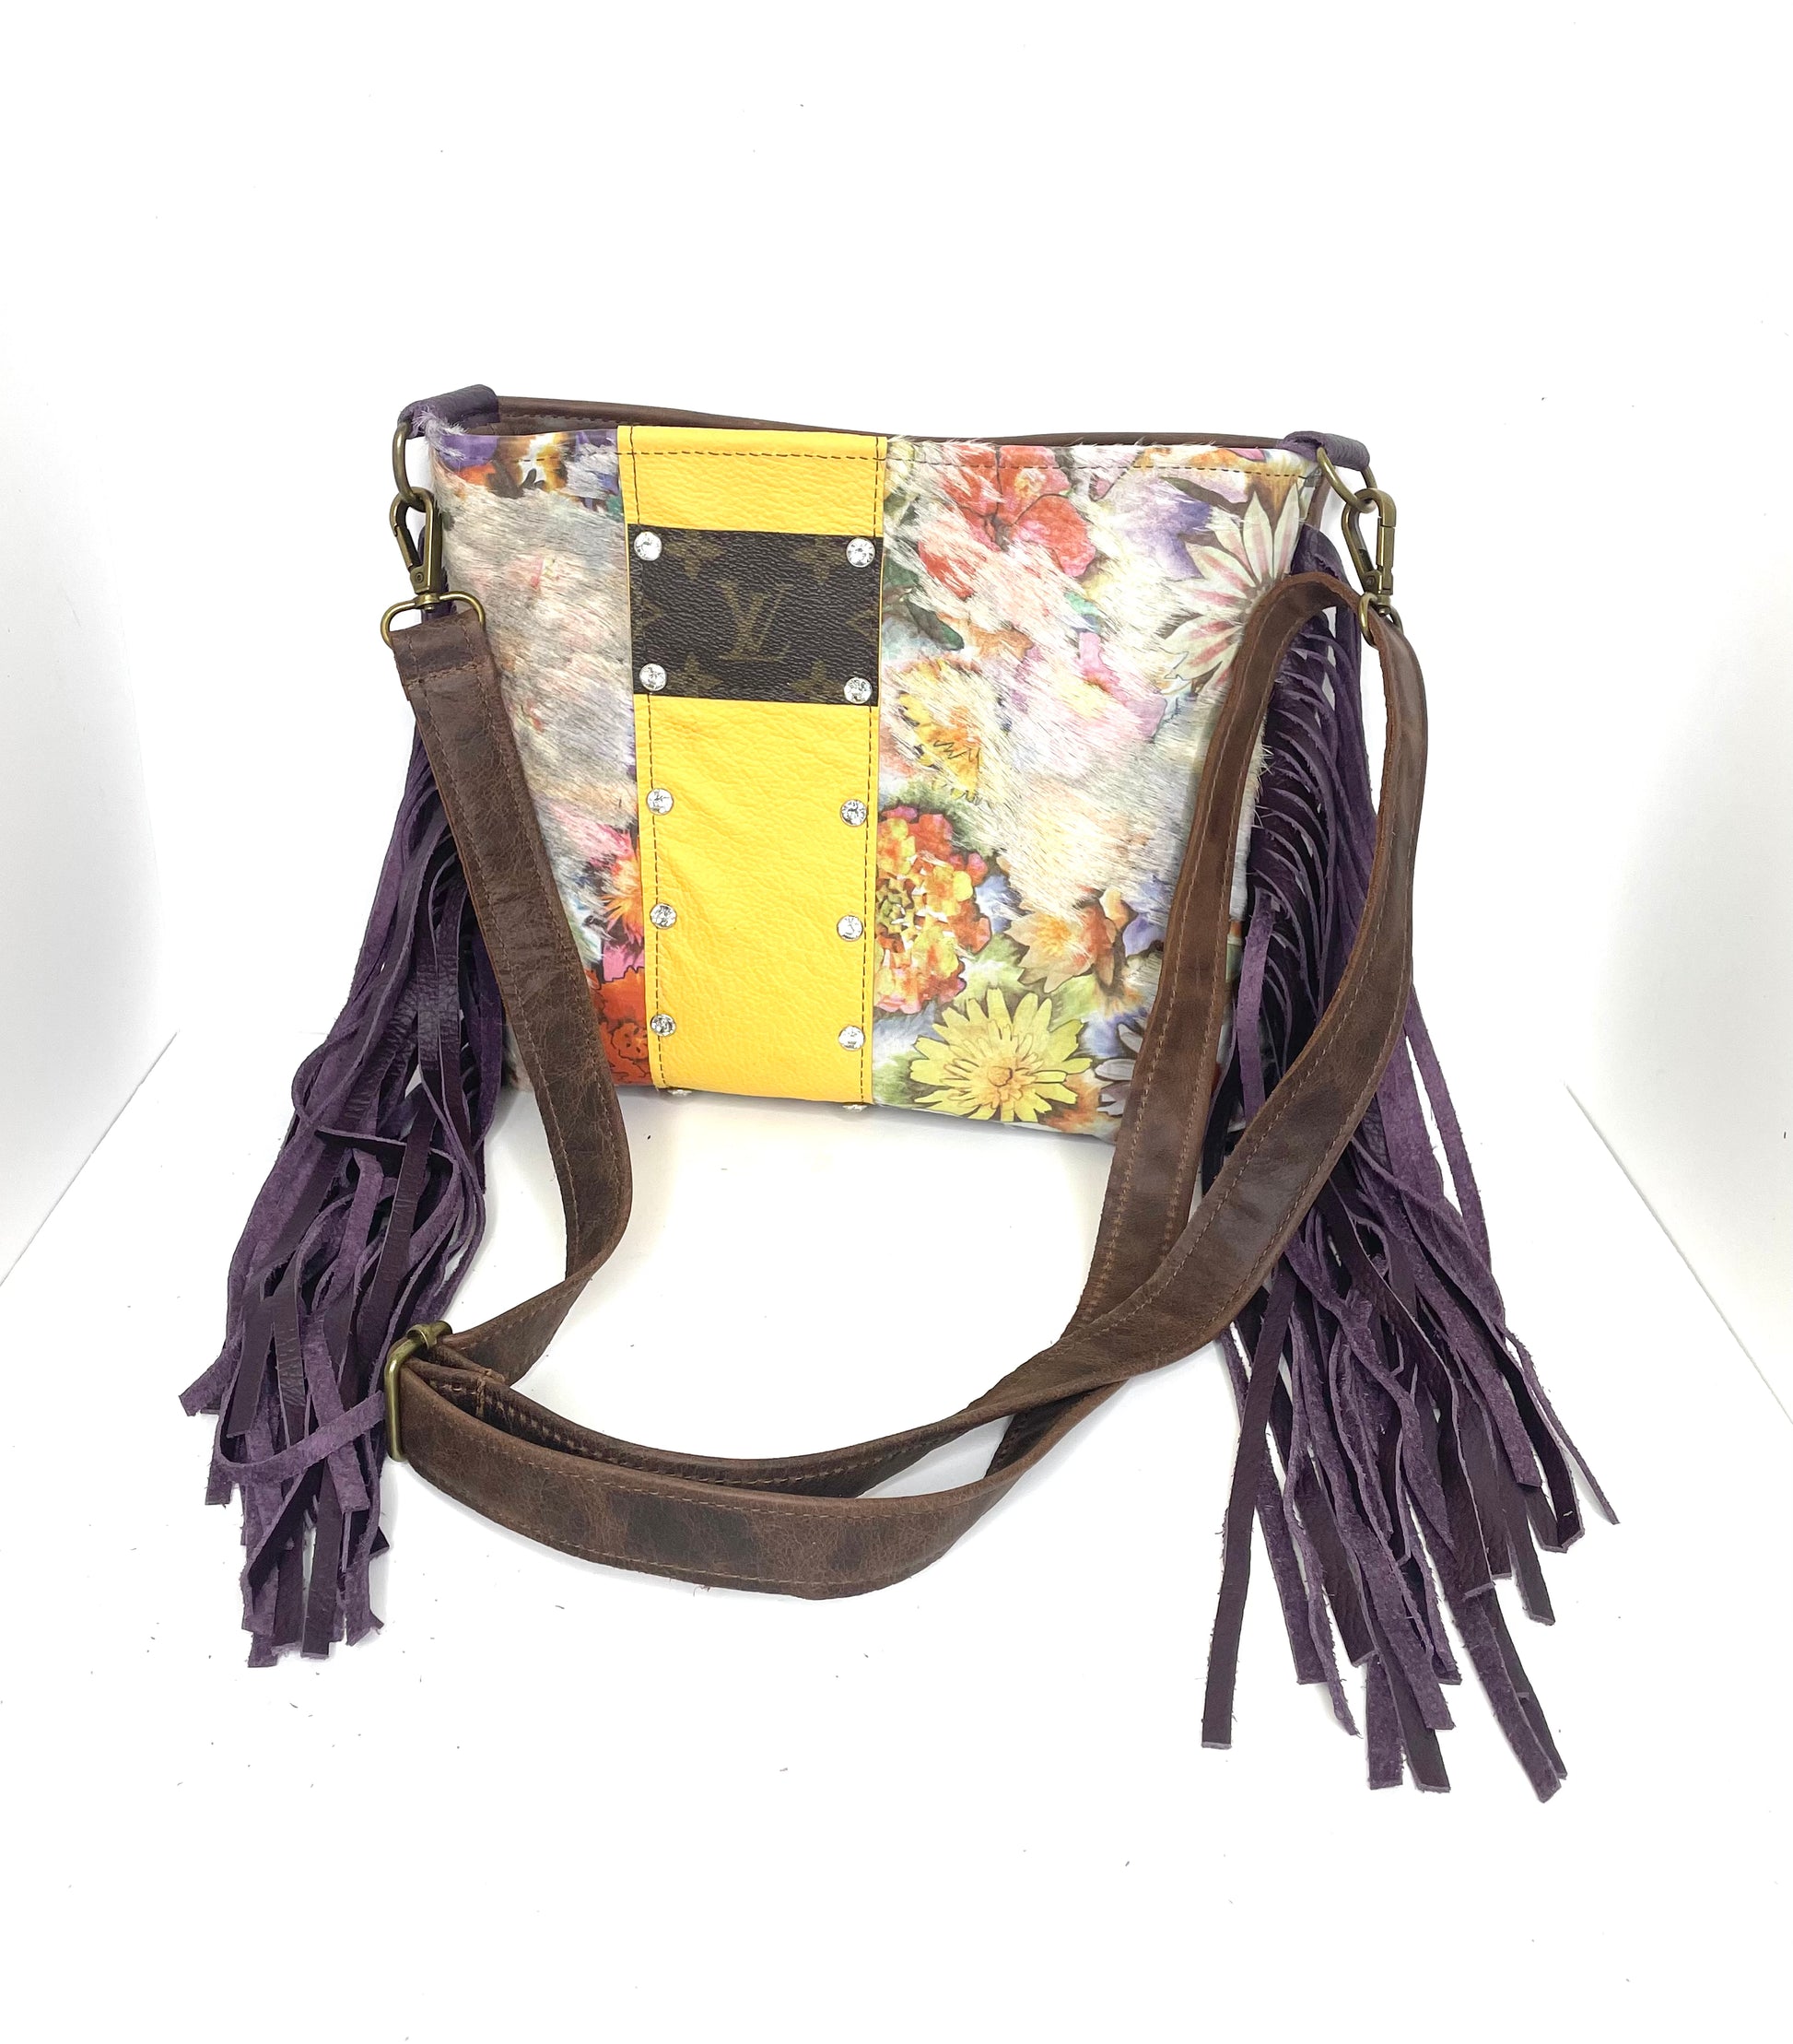 Medium Crossbody in faded floral, yellow strip, & LV patch - Patches Of Upcycling